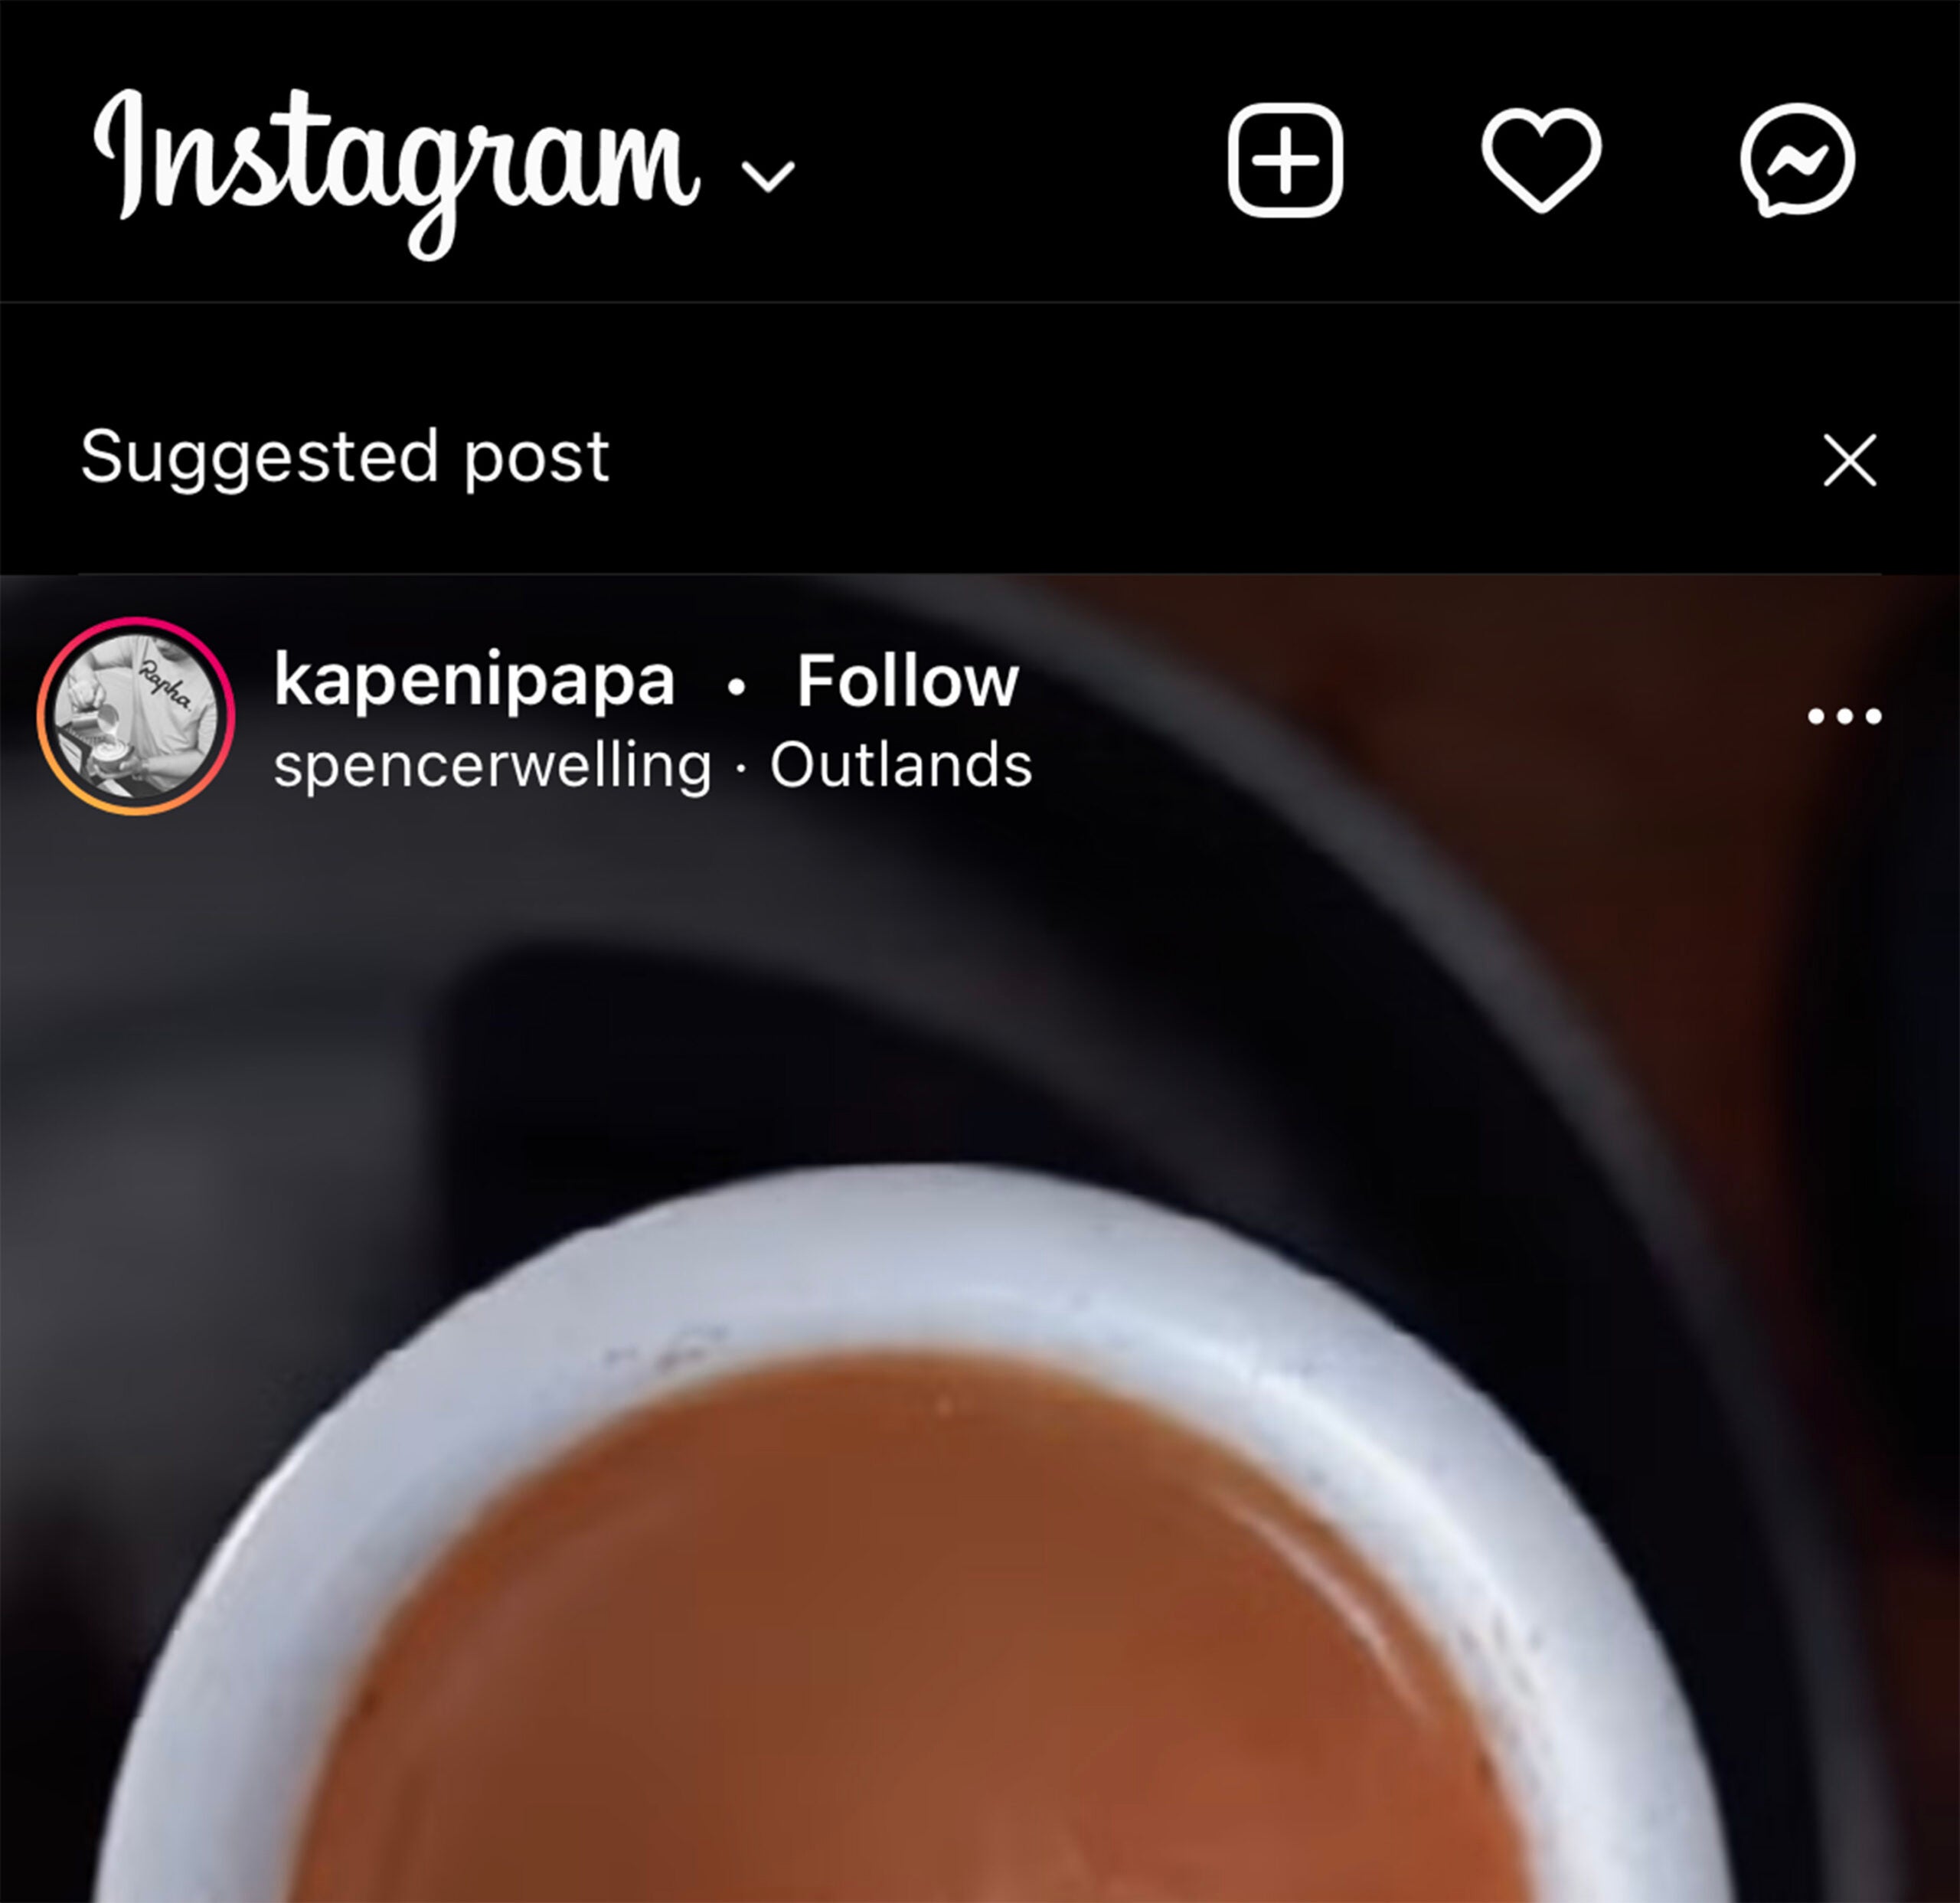 How to disable suggested posts on Instagram